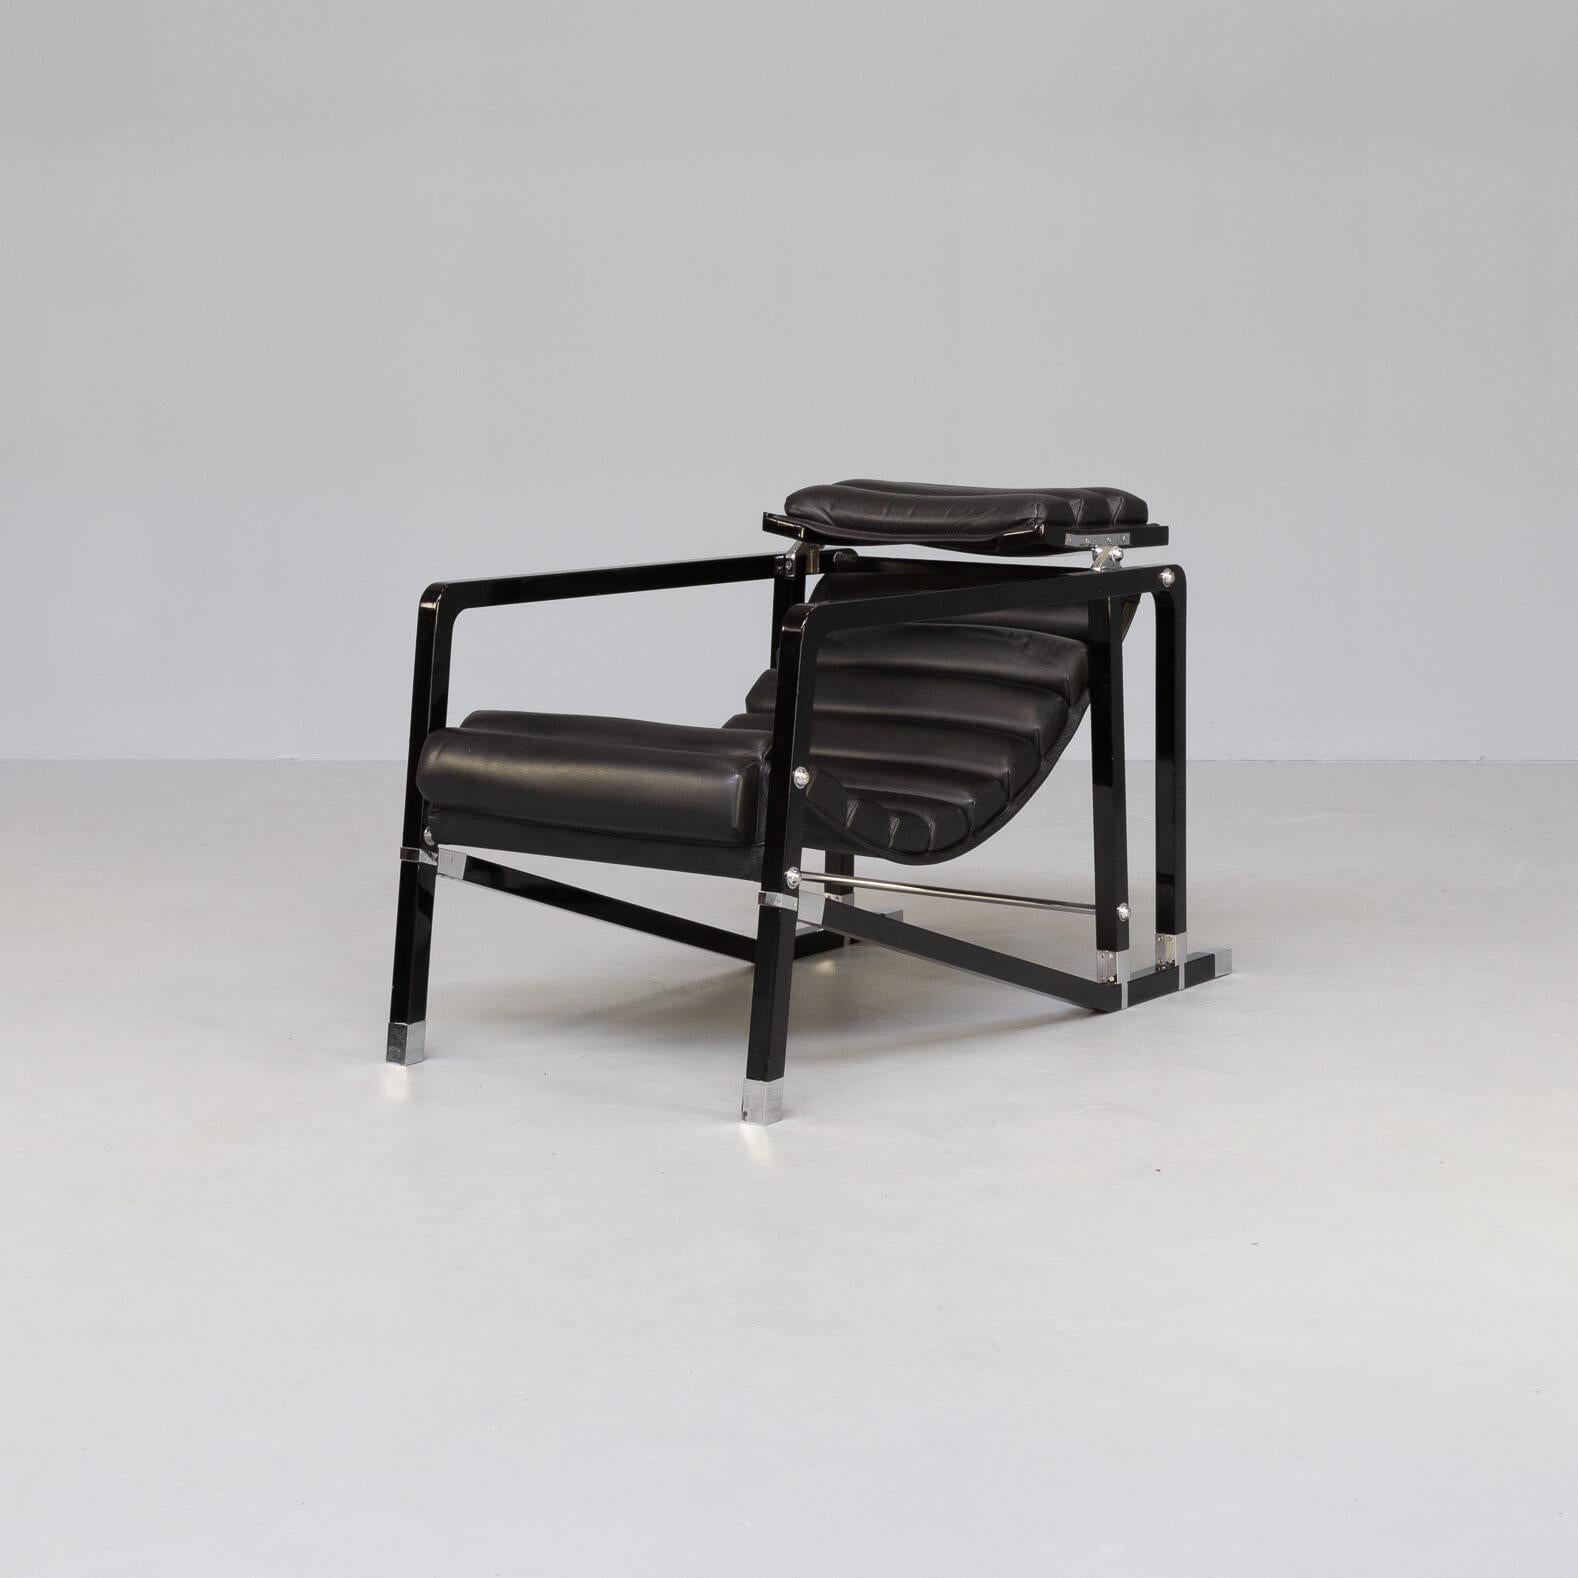 The 1927 Transat chair was used as a deck chair at the famous Villa E 1027 at Roquebrune Menton. It was originally registered under the name “Transat” by Eileen Gray and Jean Badovici in 1927. The name Transat was used as an abbreviation for